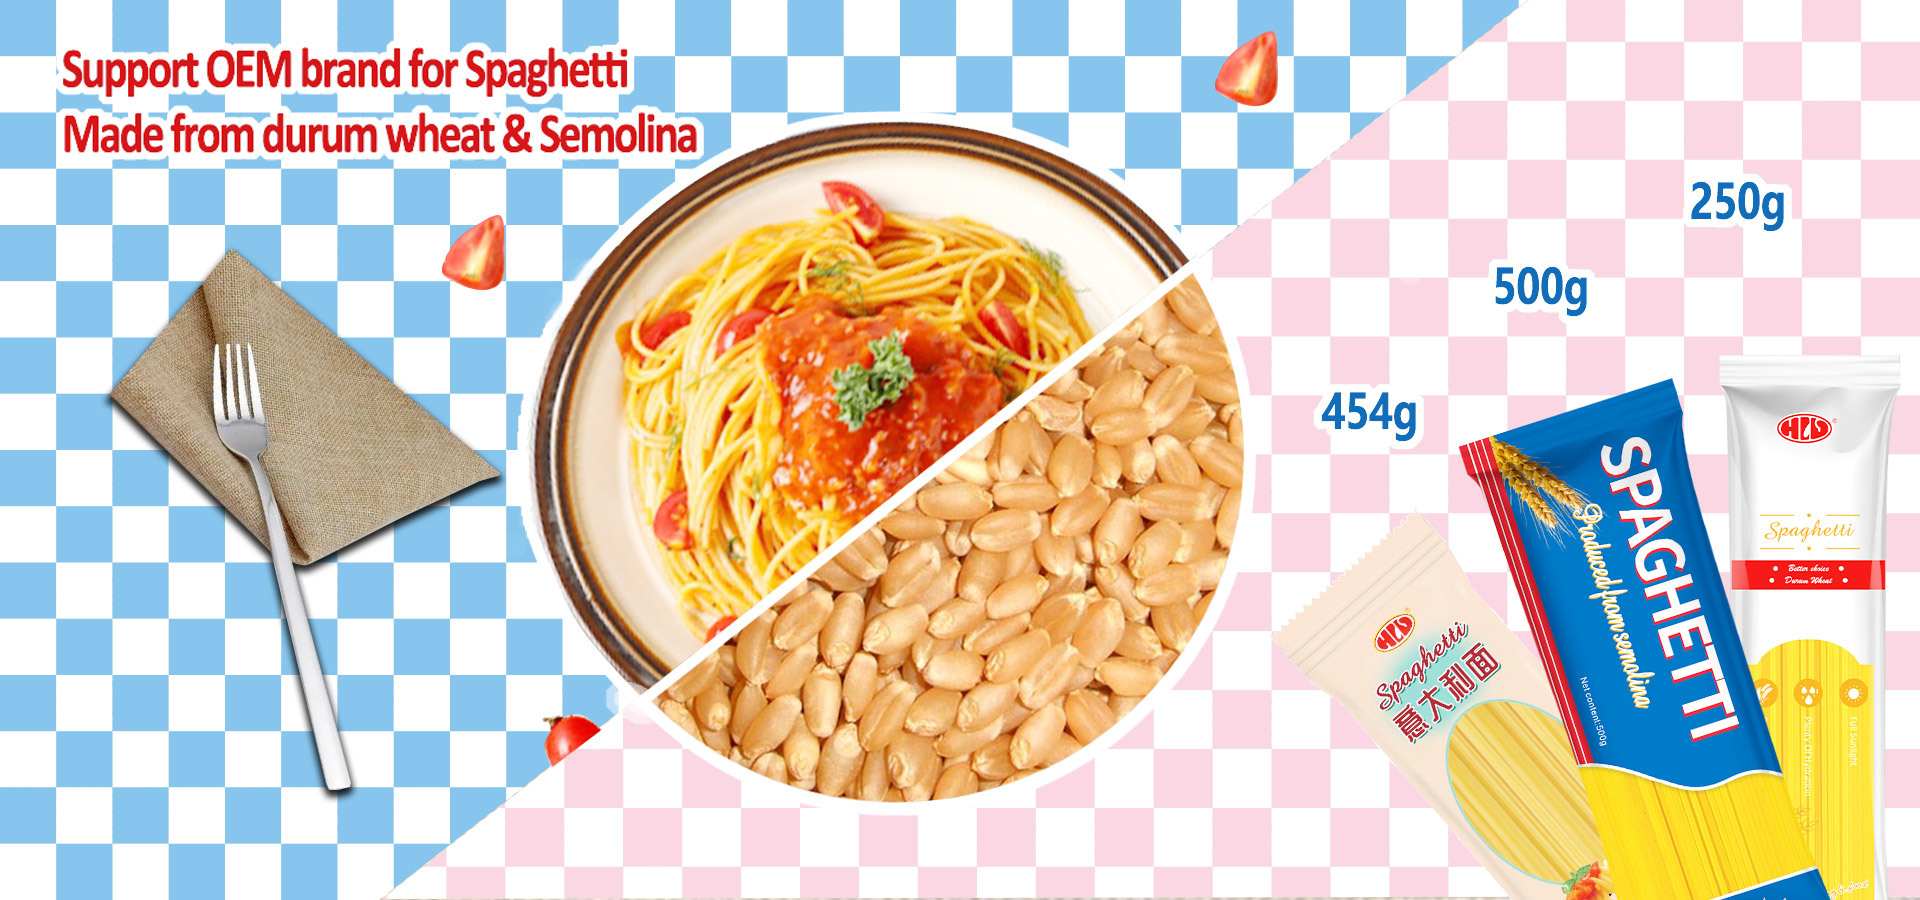 Support OEM brand for Spaghetti